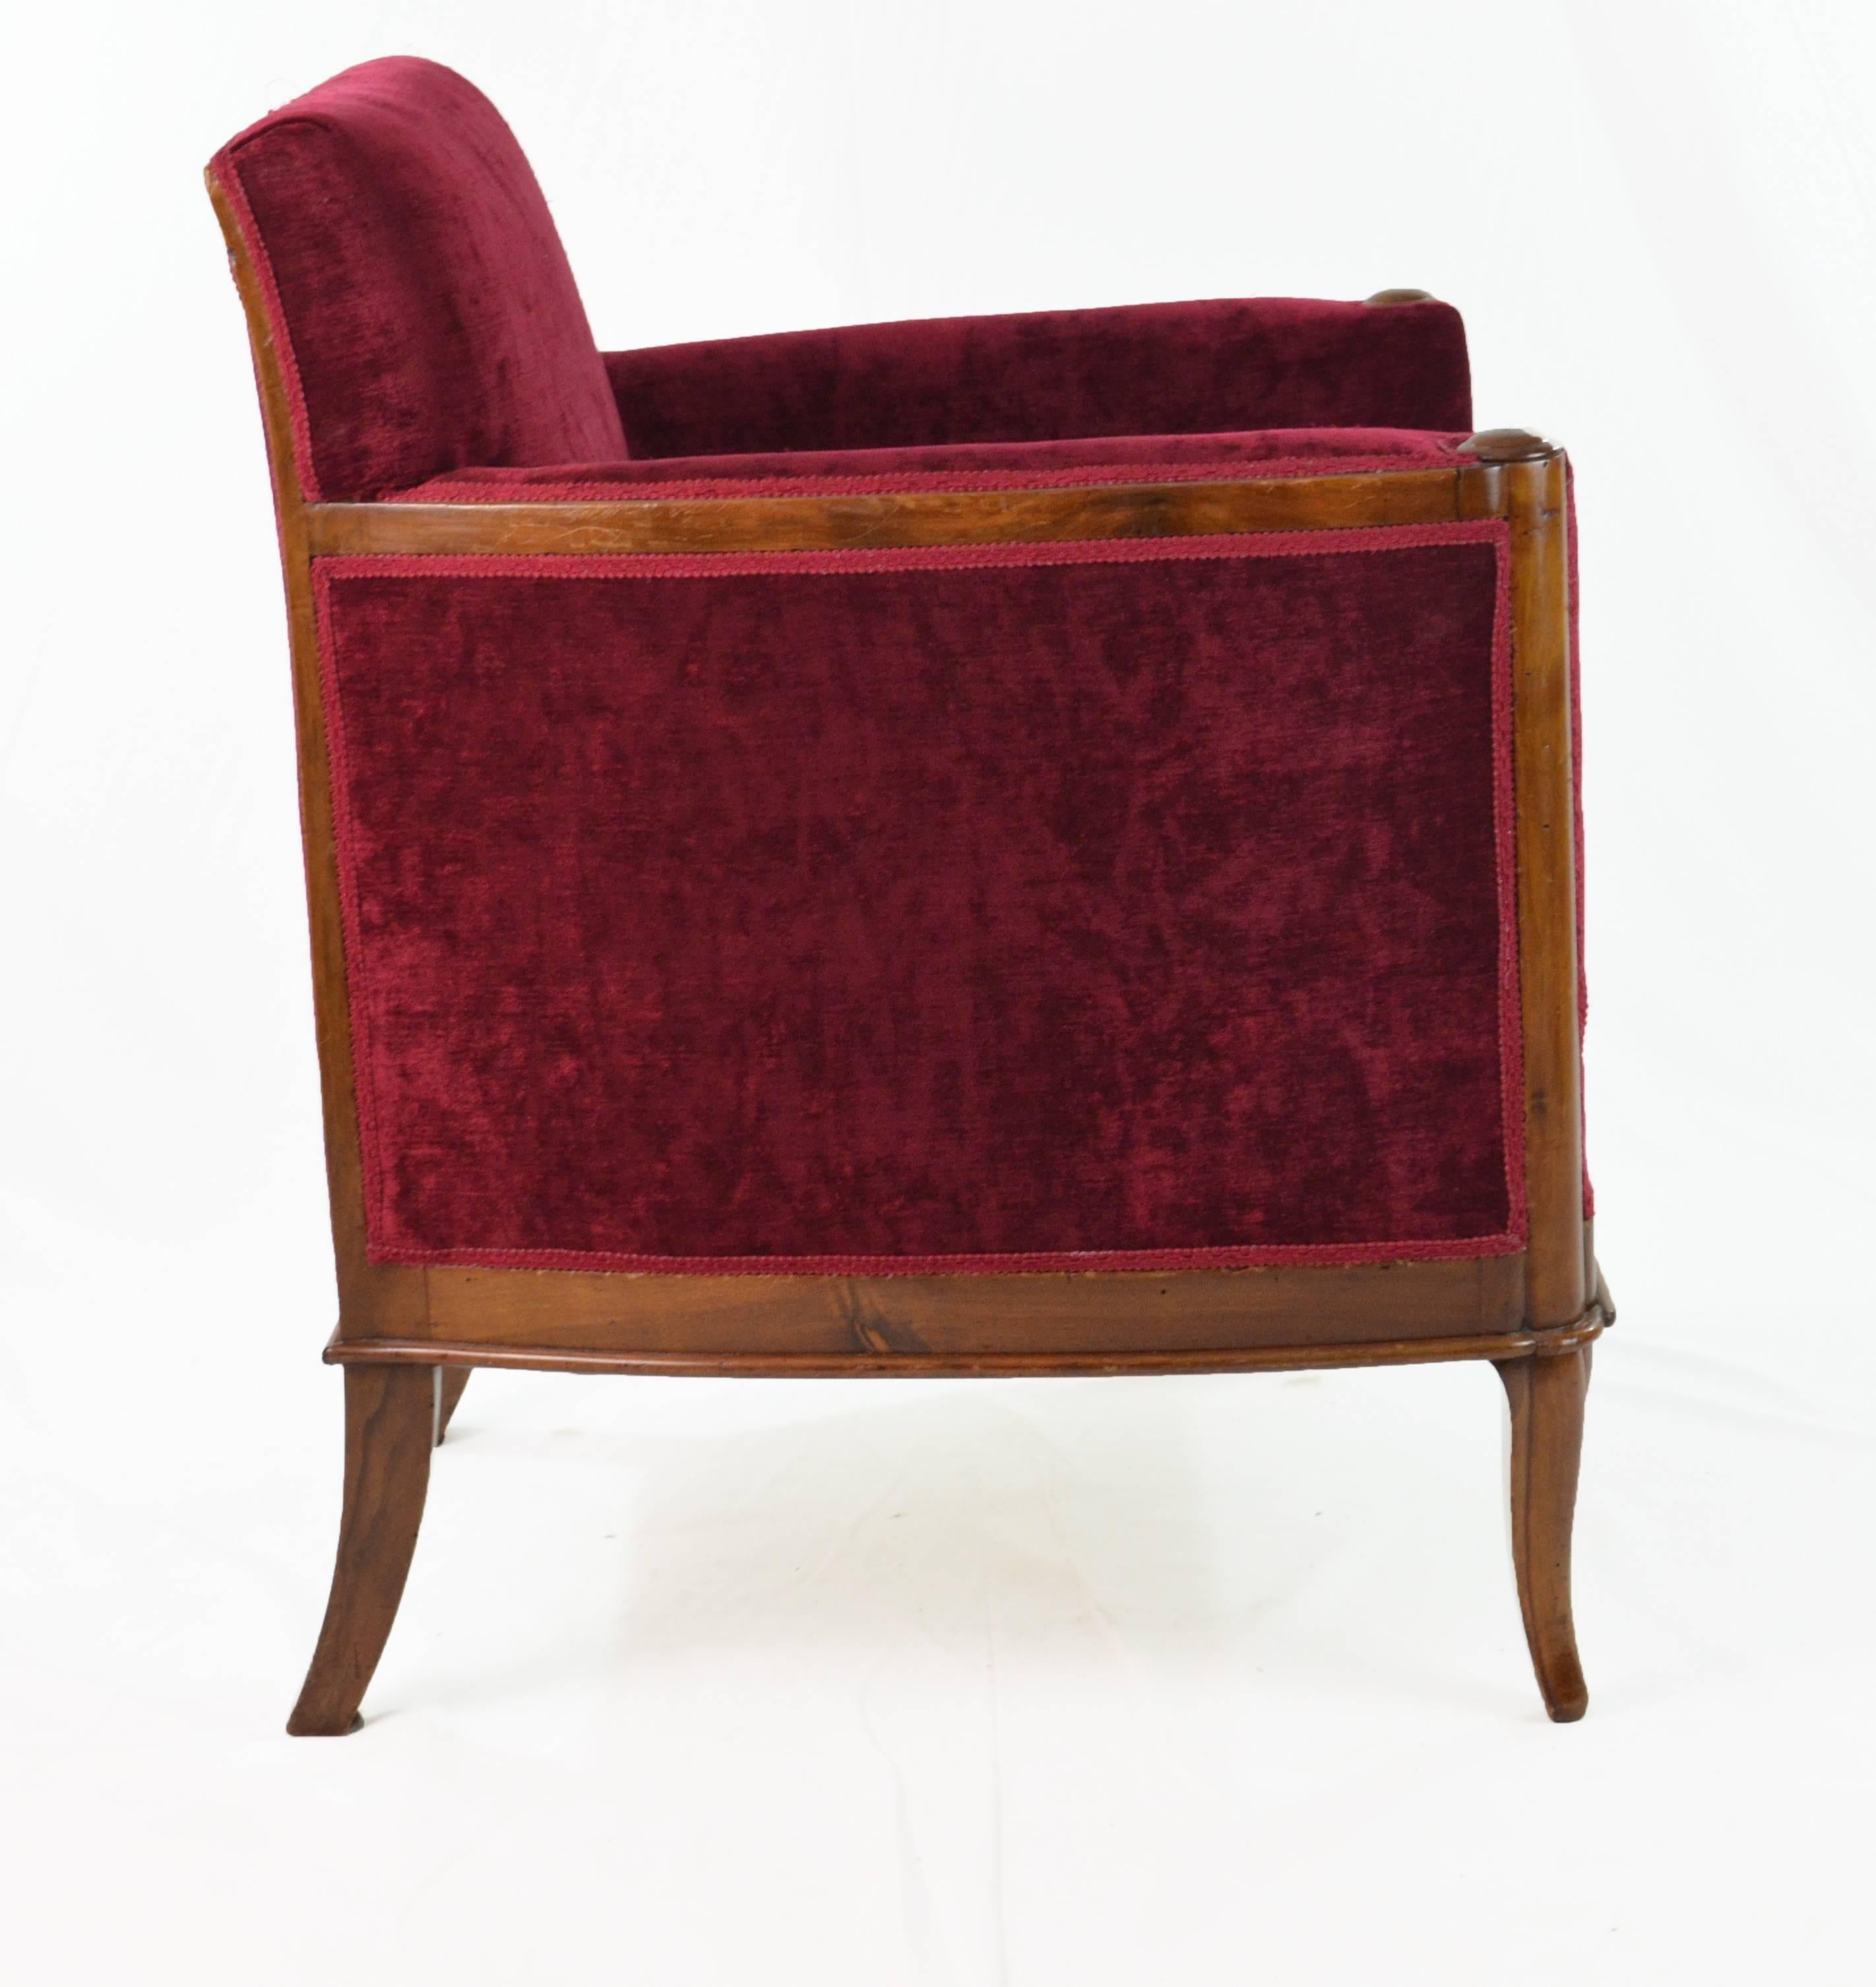 Art Deco armchairs covered in velvet and walnut wood structure.
From Italy, from Art Deco, Period 1930.
To have a (fast and out of interest) shipment quotation, we just need the destination zip code.
To have a video about this object just ask.